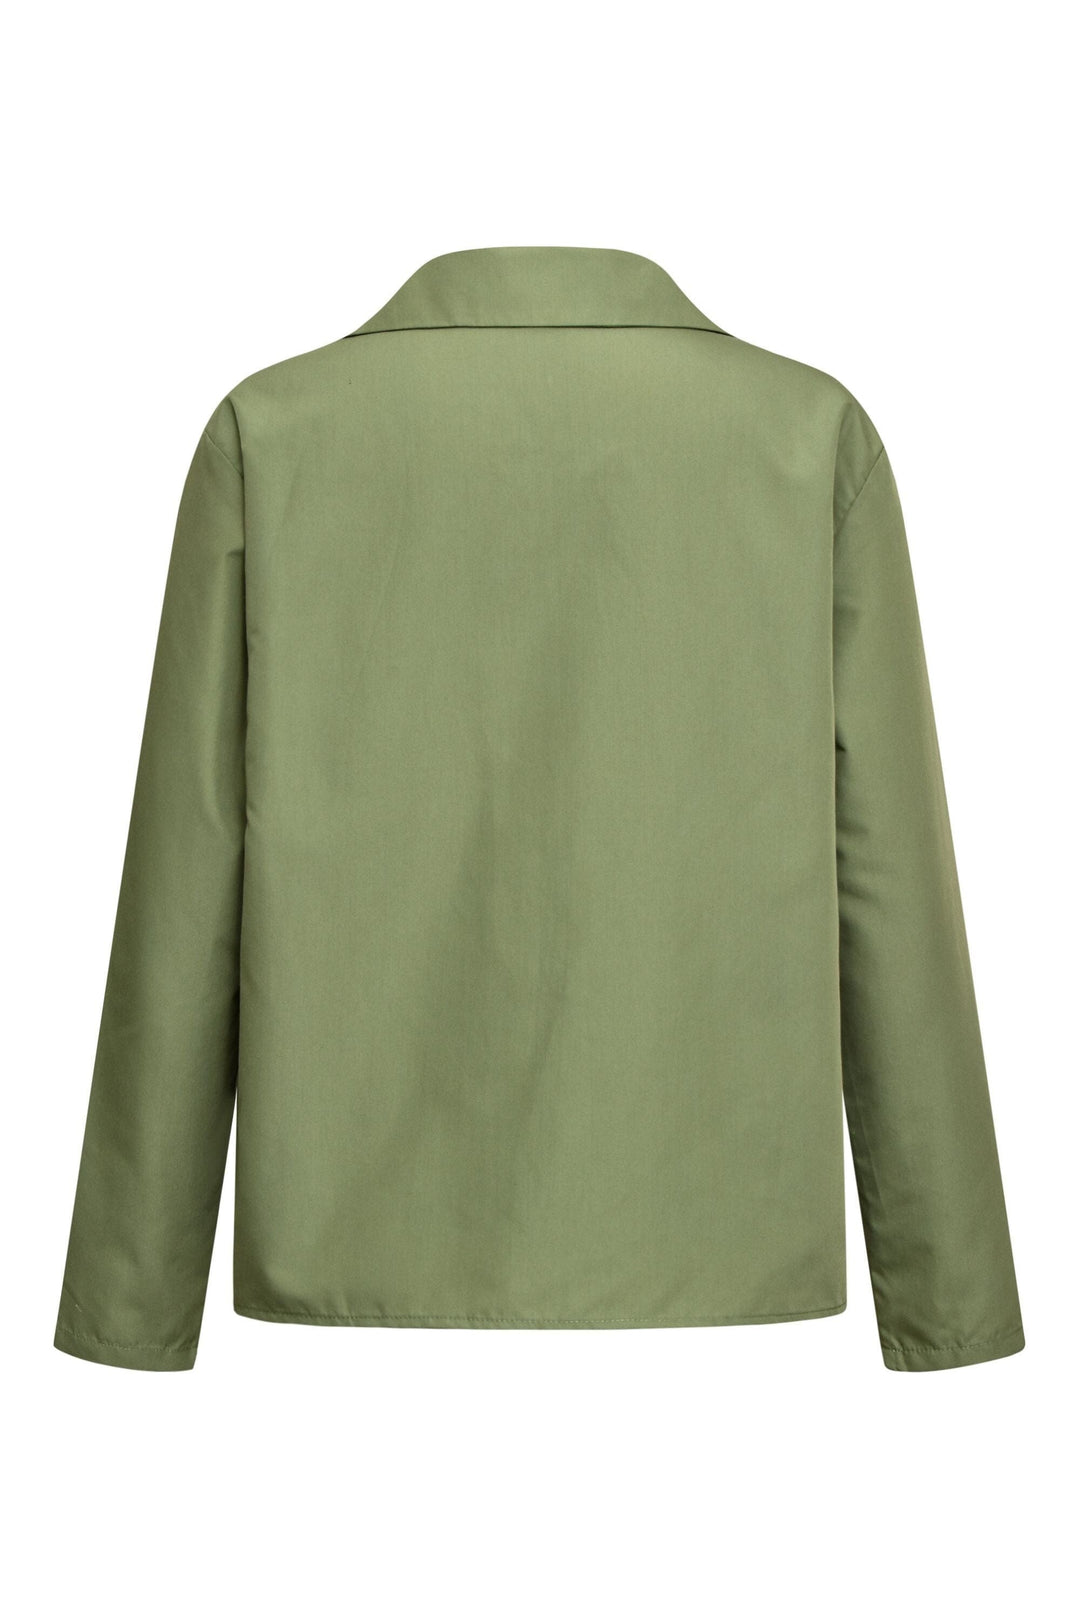 A-VIEW - Marley Blouse - 859 Dusty Green Bluser 